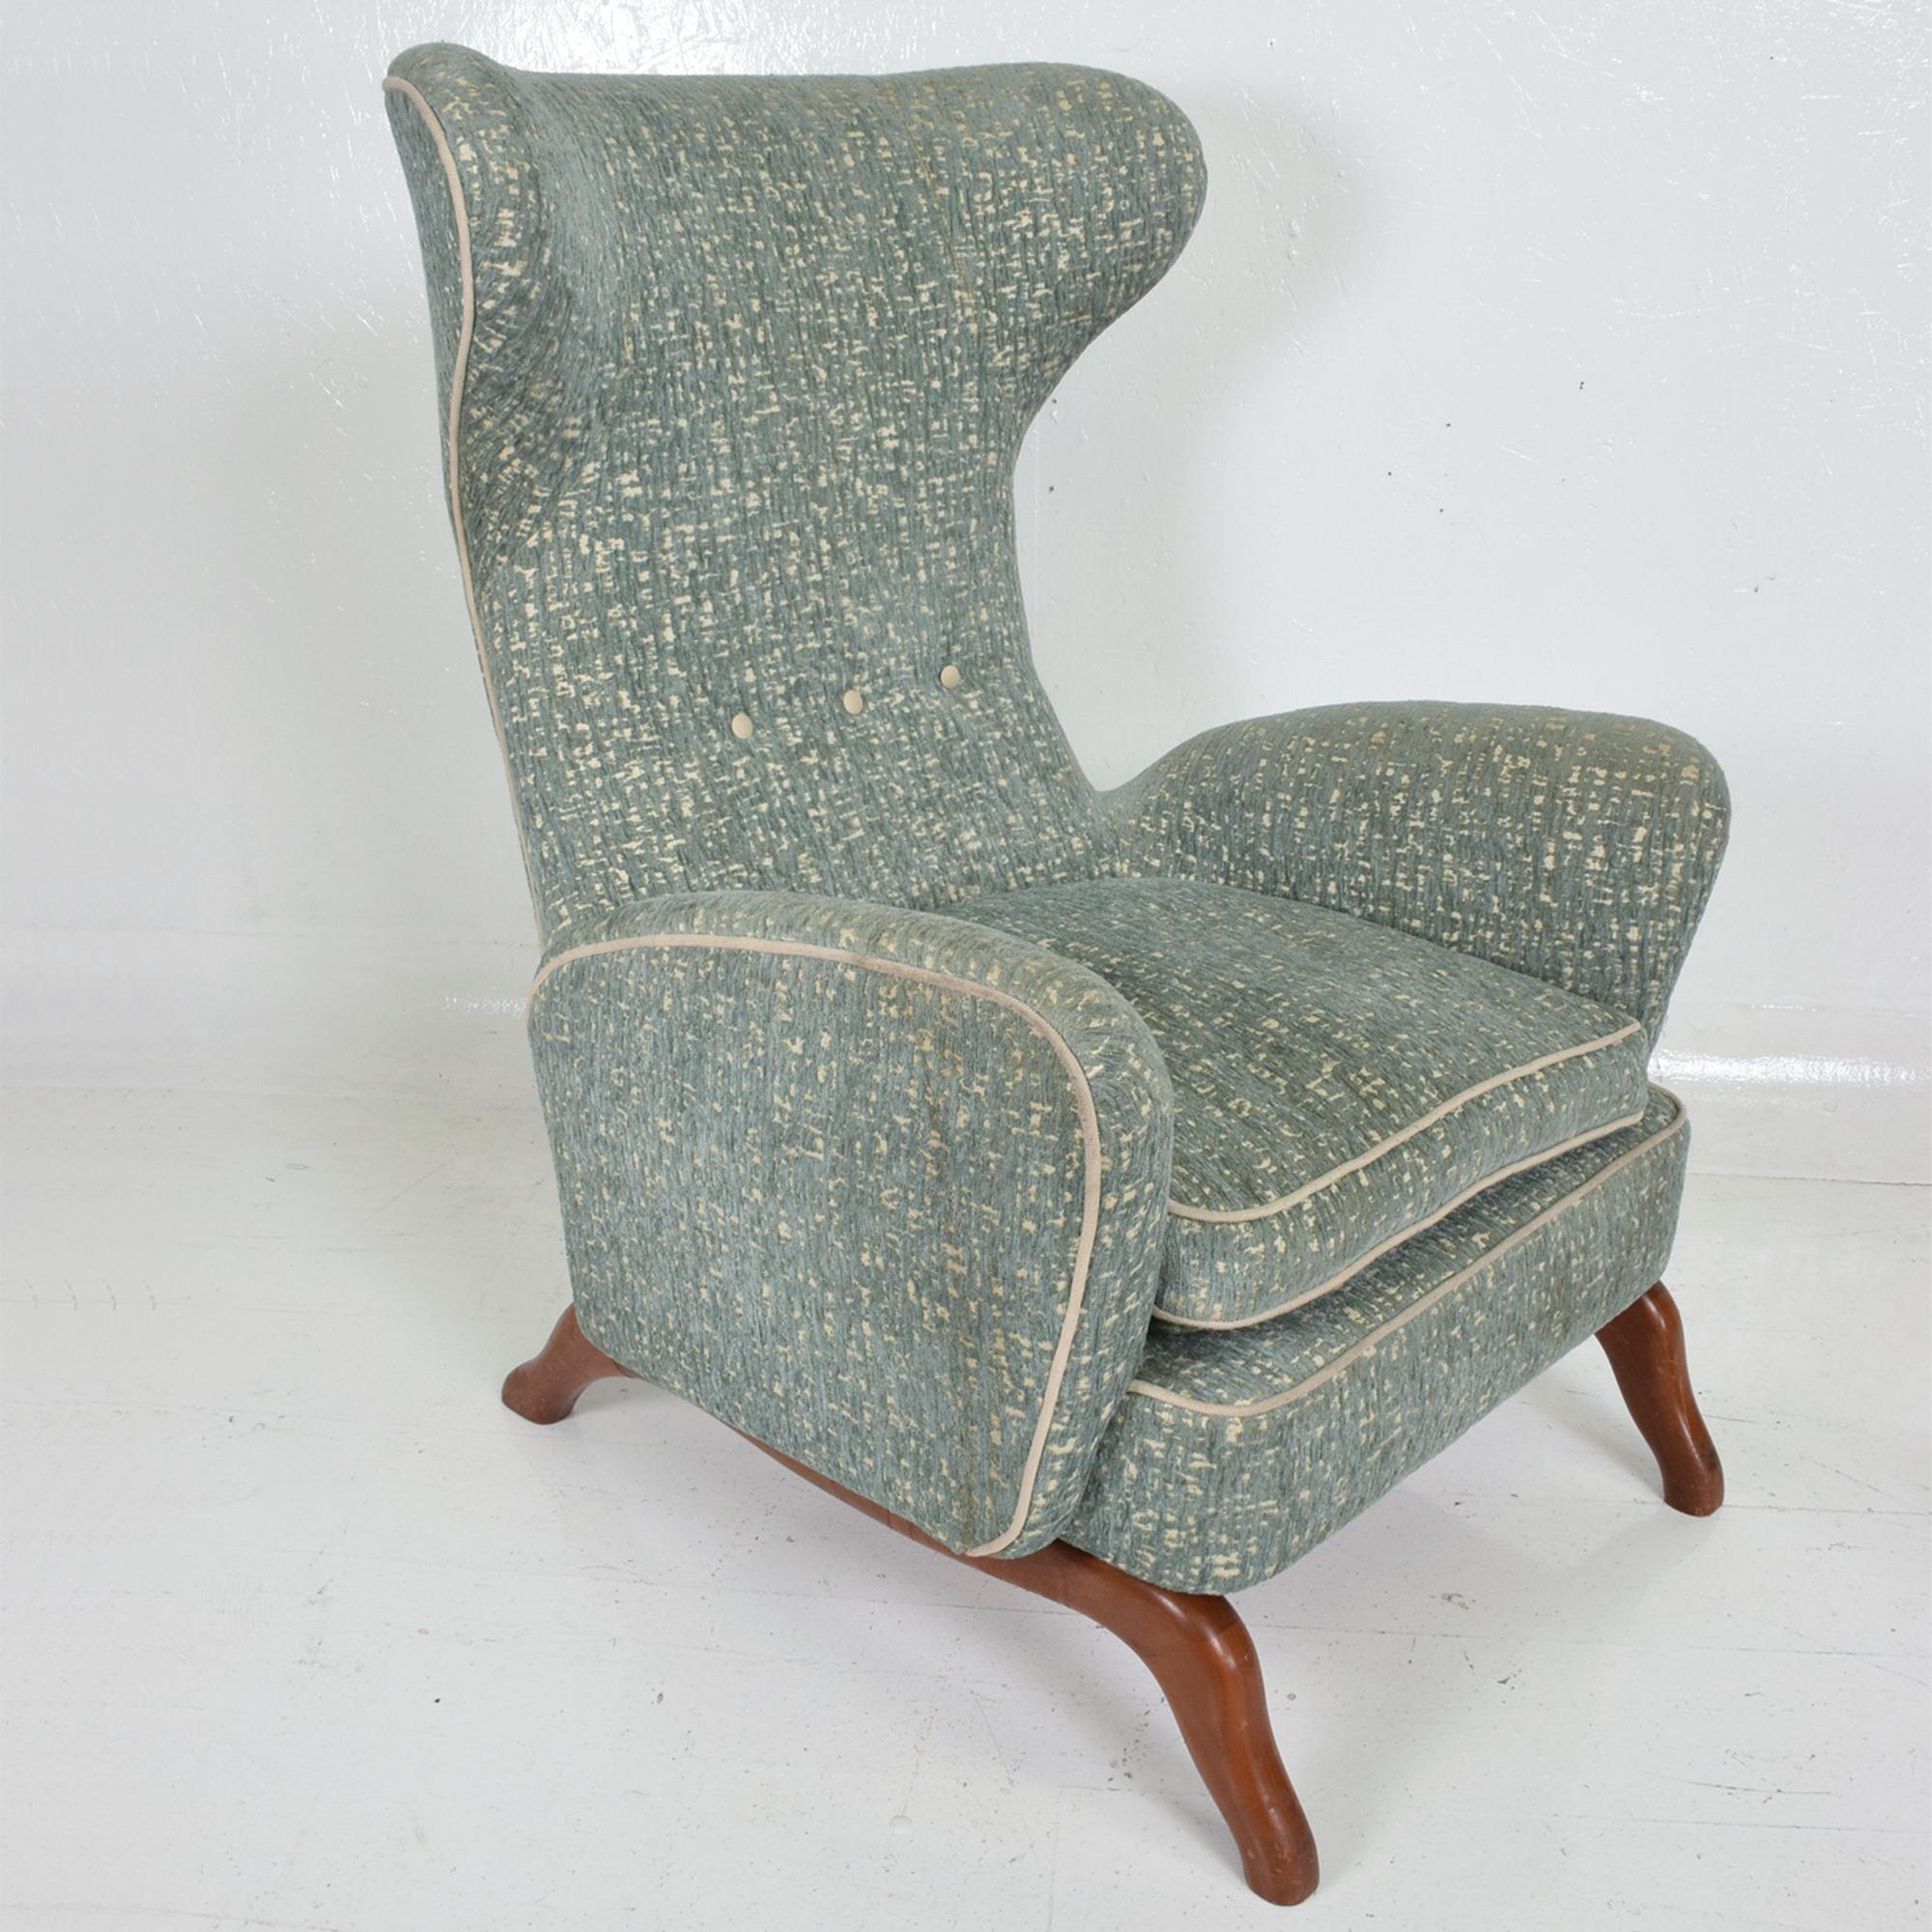 Midcentury Italian high wingback lounge armchair in the manner of Carlo Mollino and designer Gio Ponti.
Made in Italy 1950s.
Sculptural shape with solid mahogany angular legs. Upholstery is light sage green with grey.
Comfortable down feather